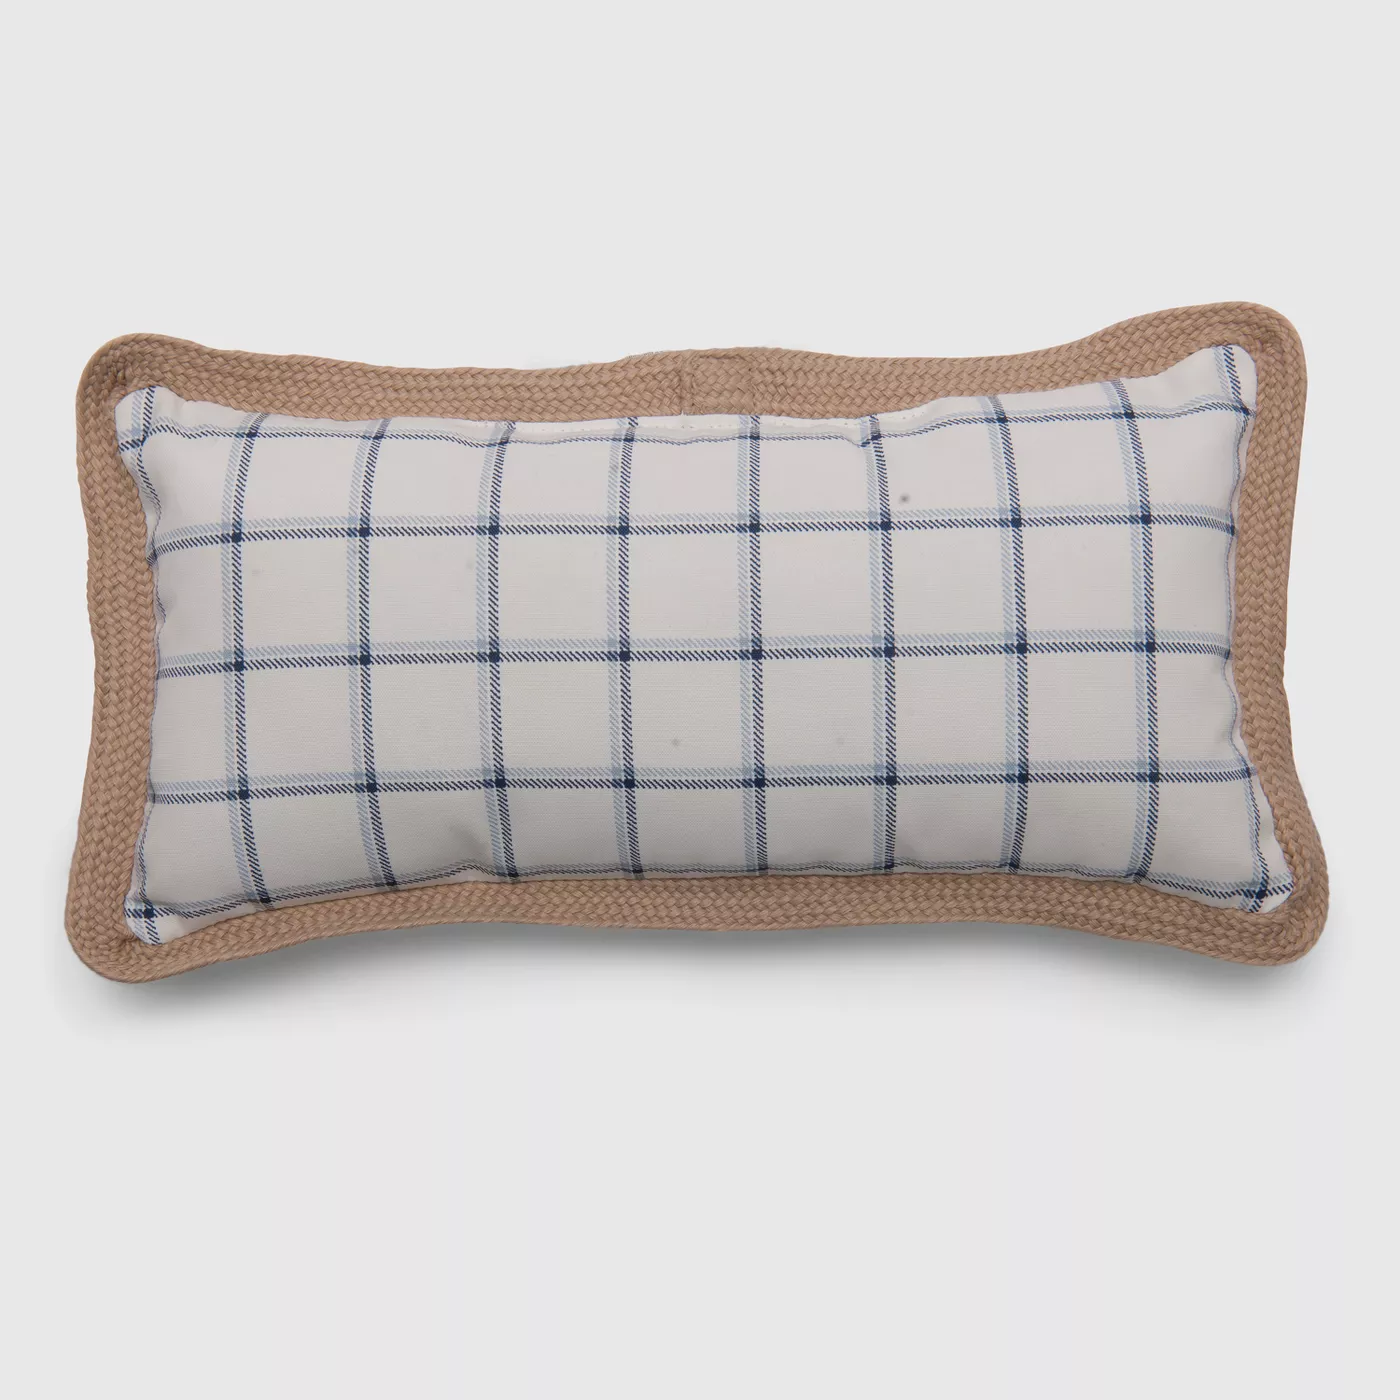 Mixed Fabric Pillow with both Burlap and Cotton from Hearth and Hand Collection